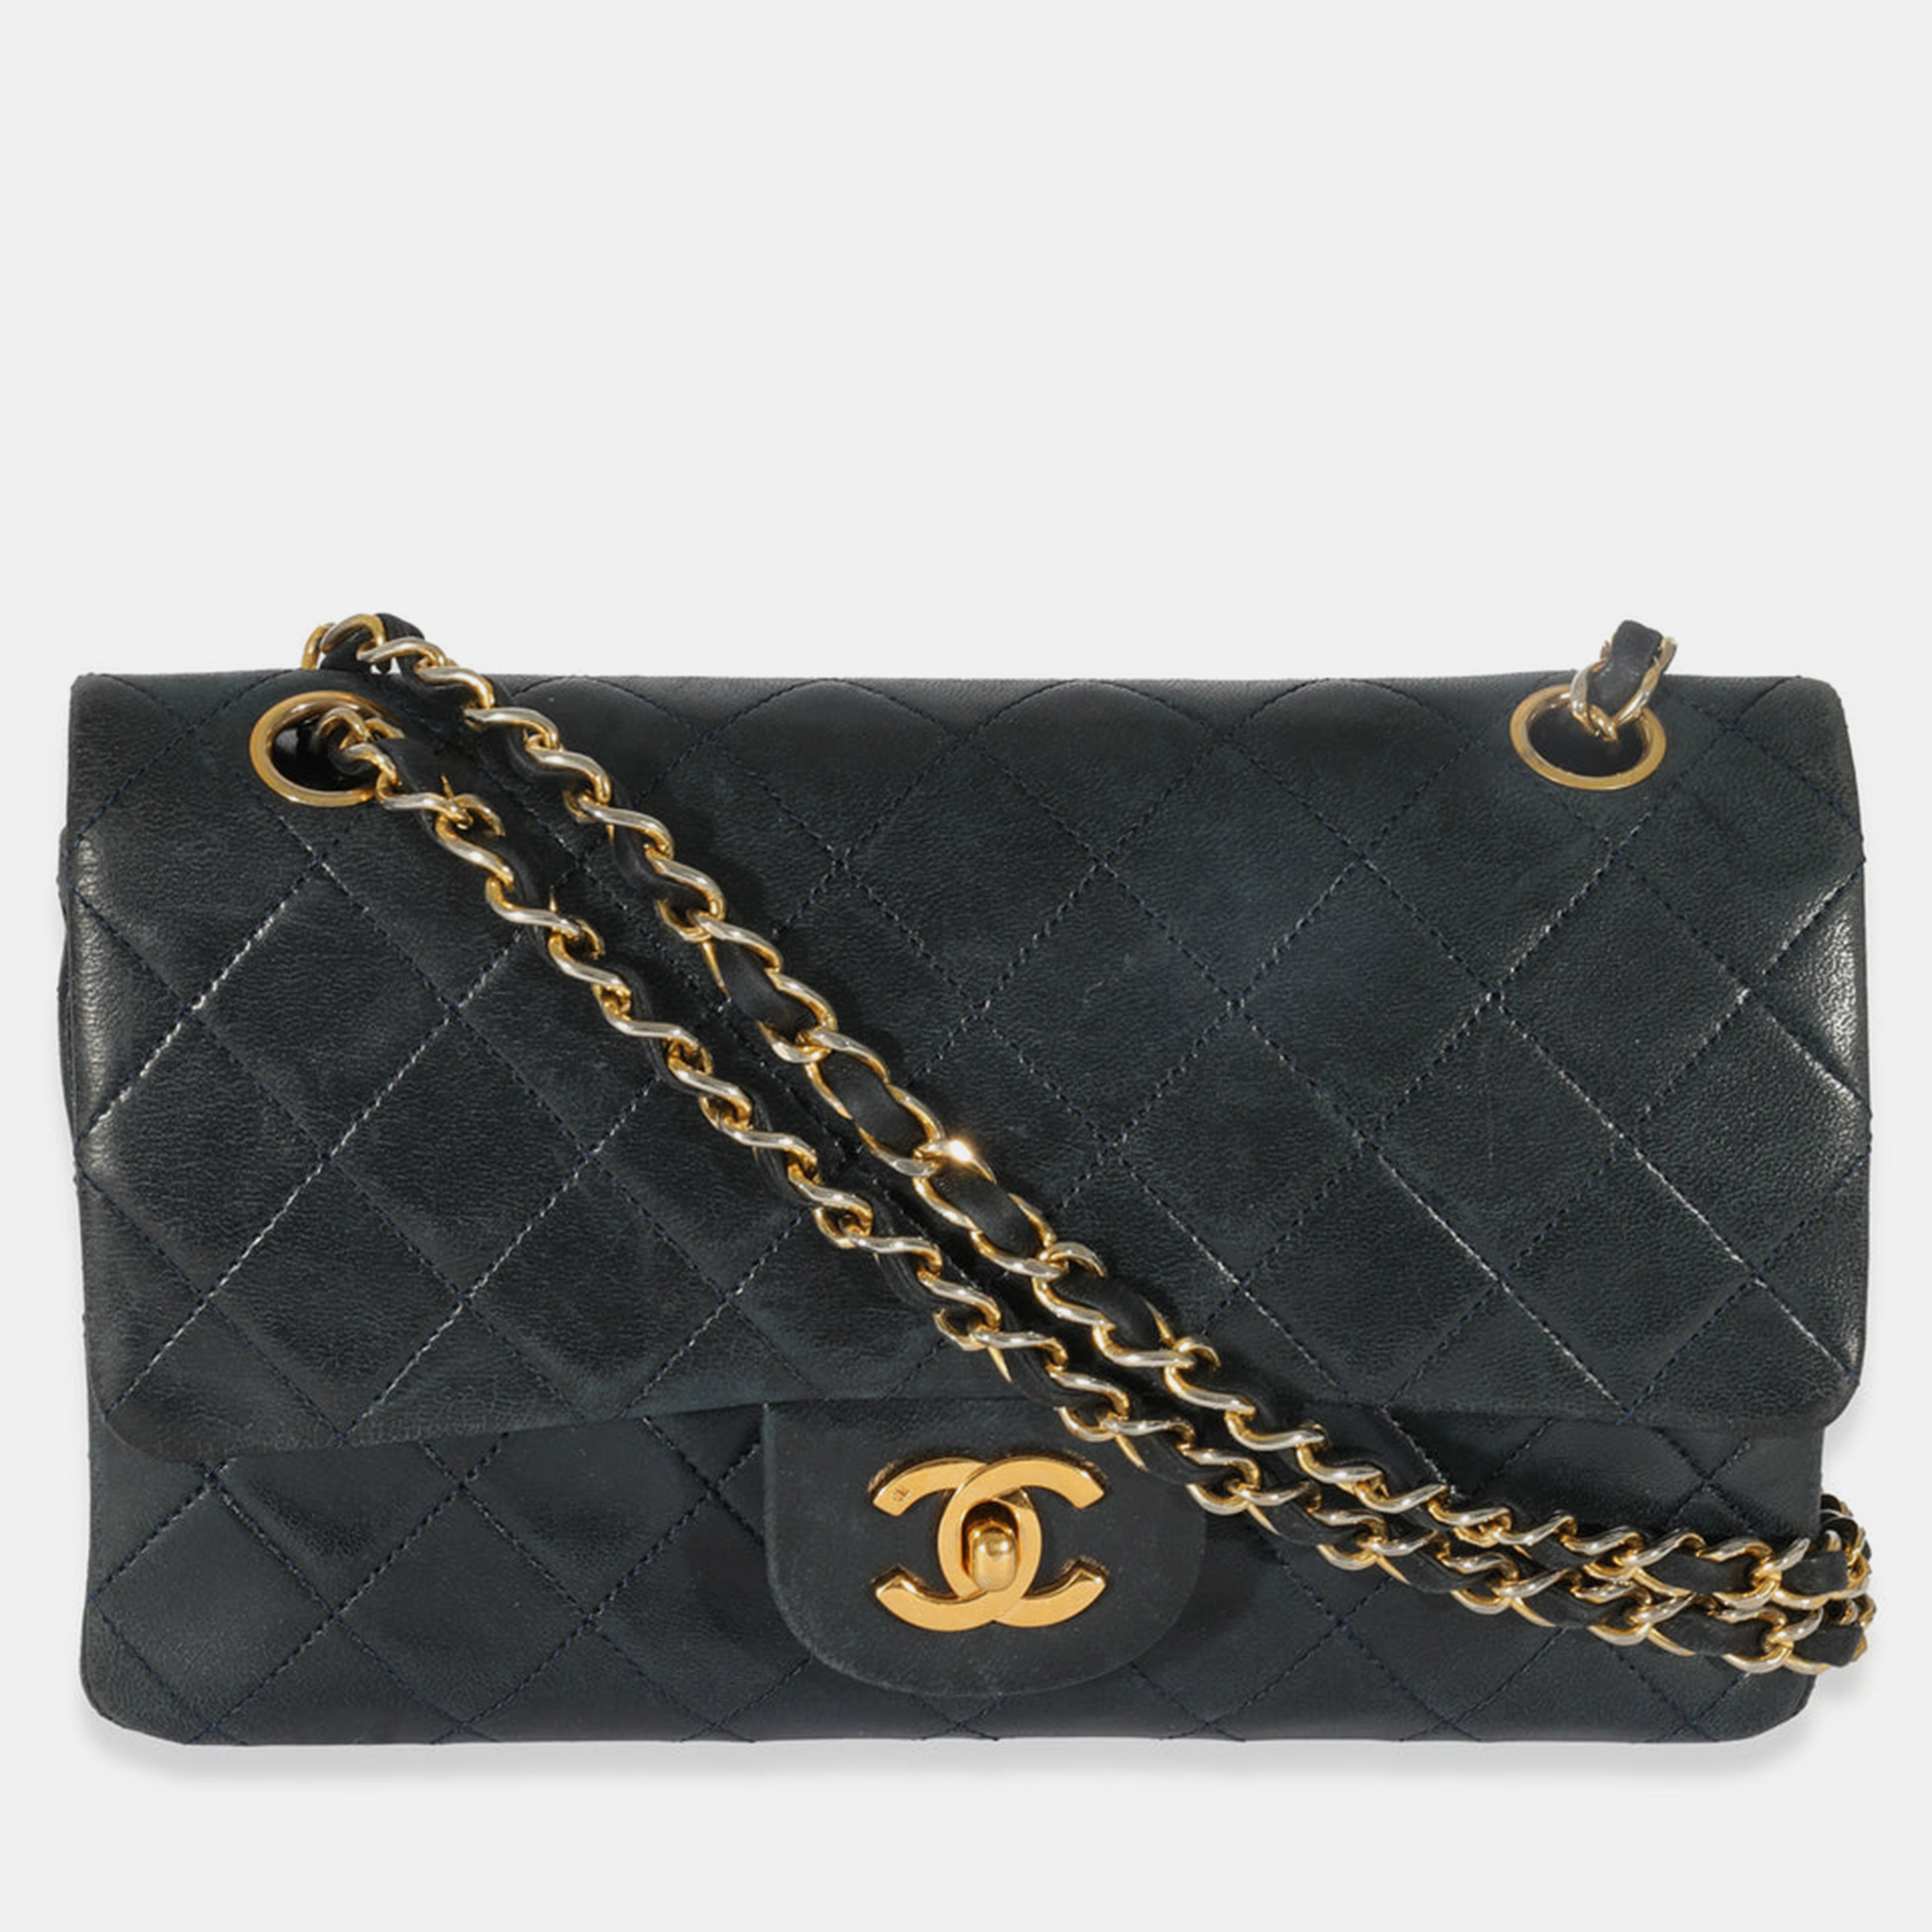 Chanel navy quilted lambskin small classic double flap bag